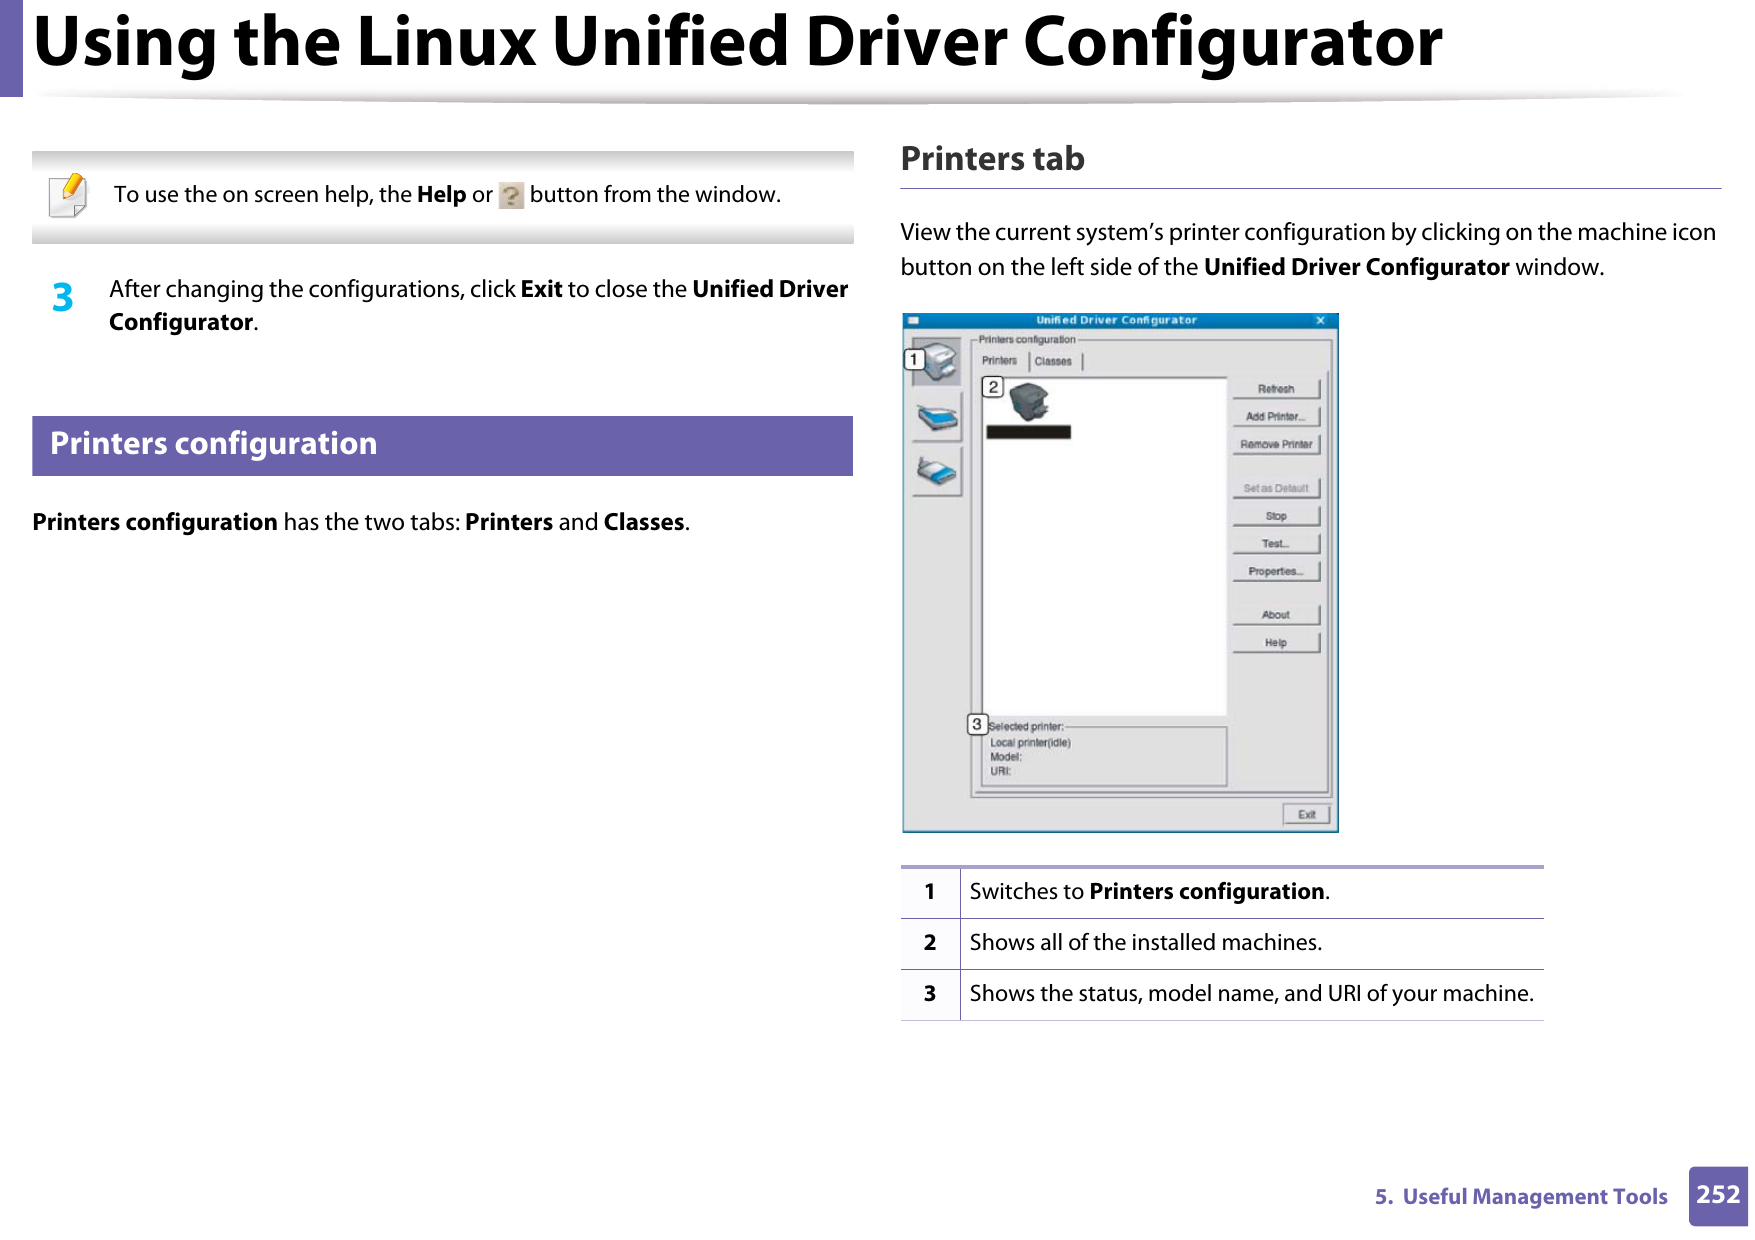 Using the Linux Unified Driver Configurator2525.  Useful Management Tools  To use the on screen help, the Help or   button from the window. 3  After changing the configurations, click Exit to close the Unified Driver Configurator.13 Printers configurationPrinters configuration has the two tabs: Printers and Classes.Printers tabView the current system’s printer configuration by clicking on the machine icon button on the left side of the Unified Driver Configurator window.1Switches to Printers configuration.2Shows all of the installed machines.3Shows the status, model name, and URI of your machine.